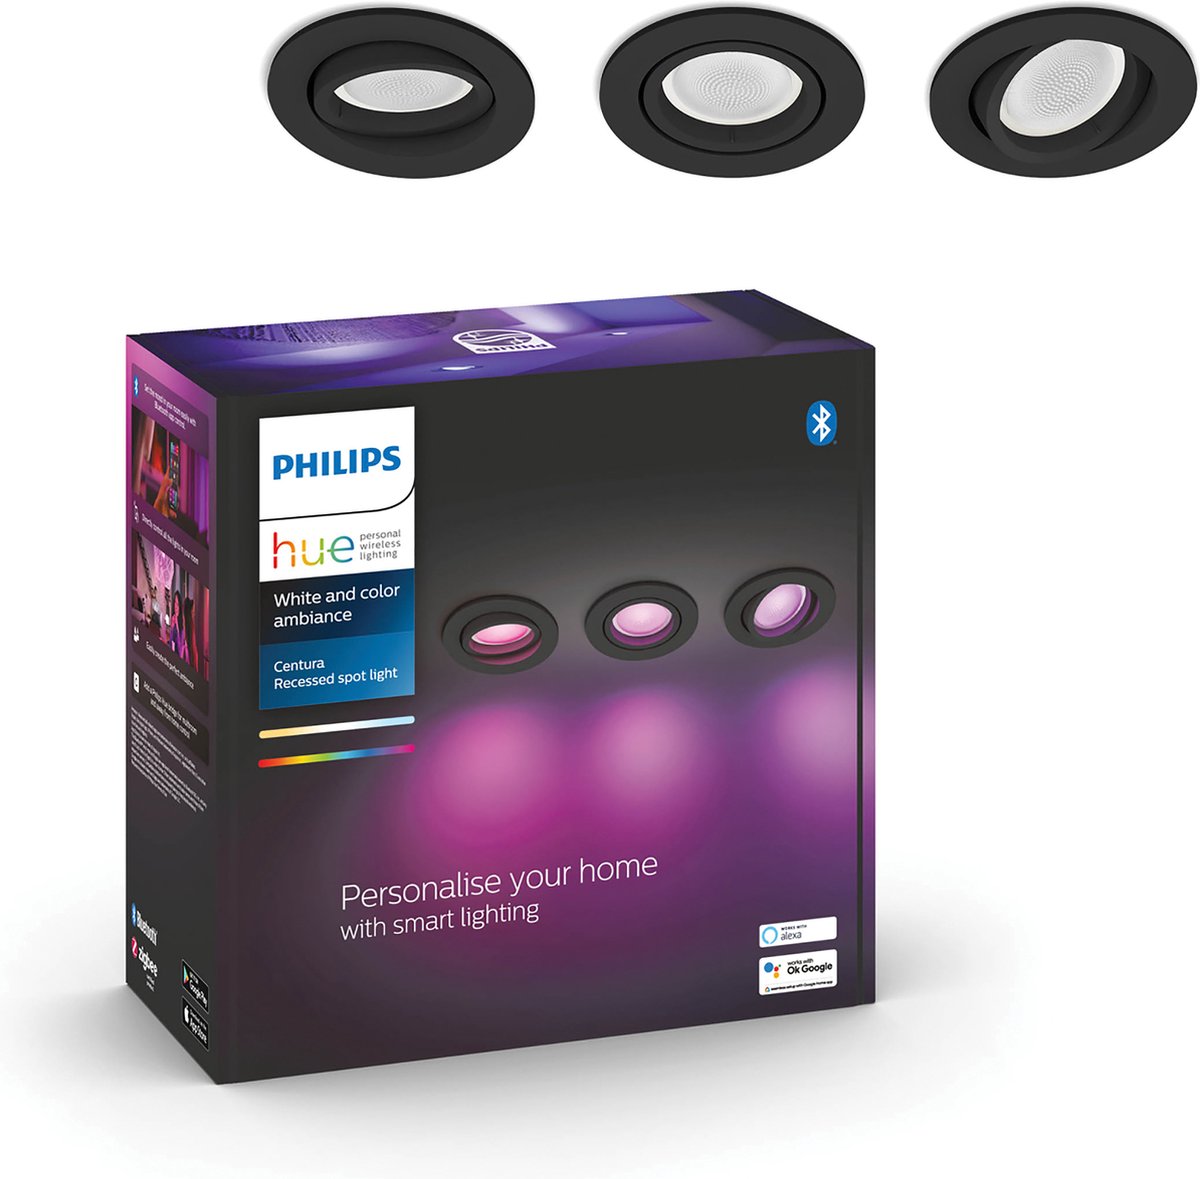 Philips Hue Centura inbouwspot – White and Color Ambiance – 3-pack – zwart – rond – Bluetooth